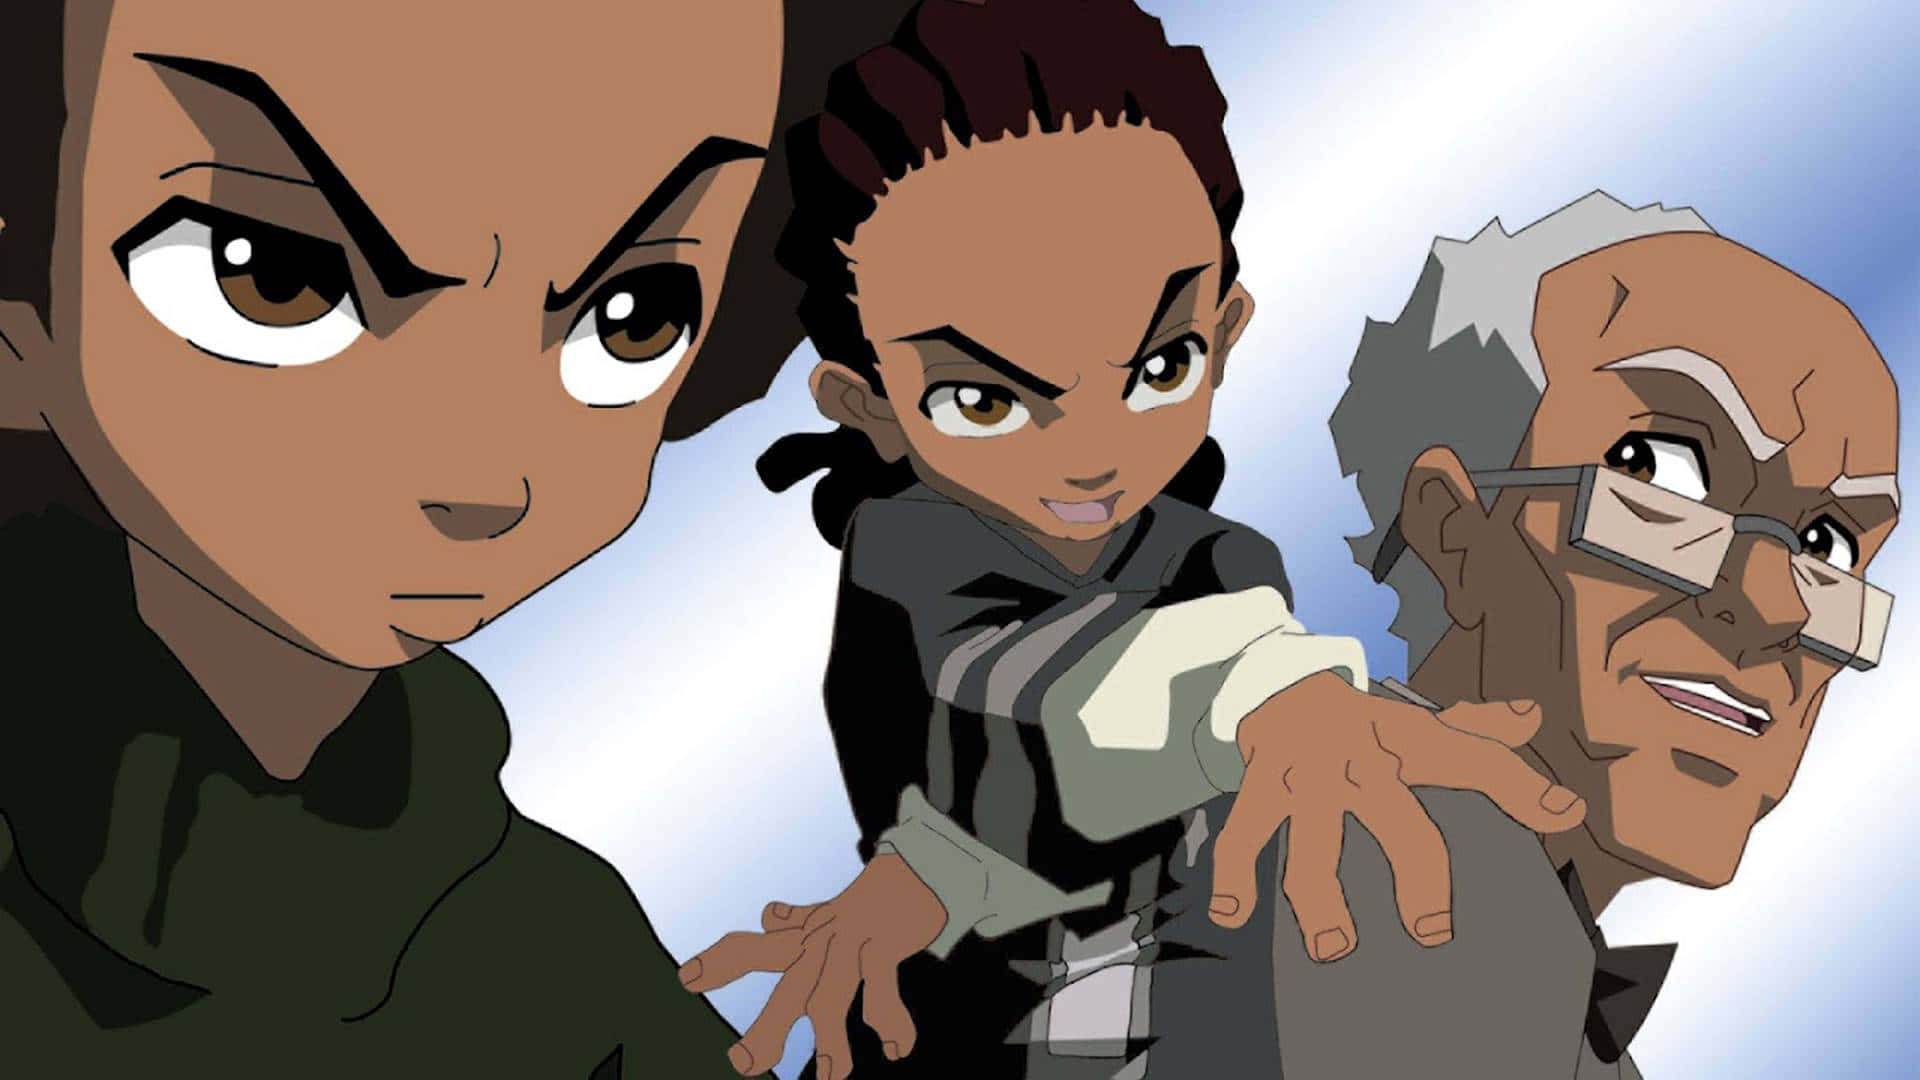 Prepare for radical adventures with the Boondocks crew